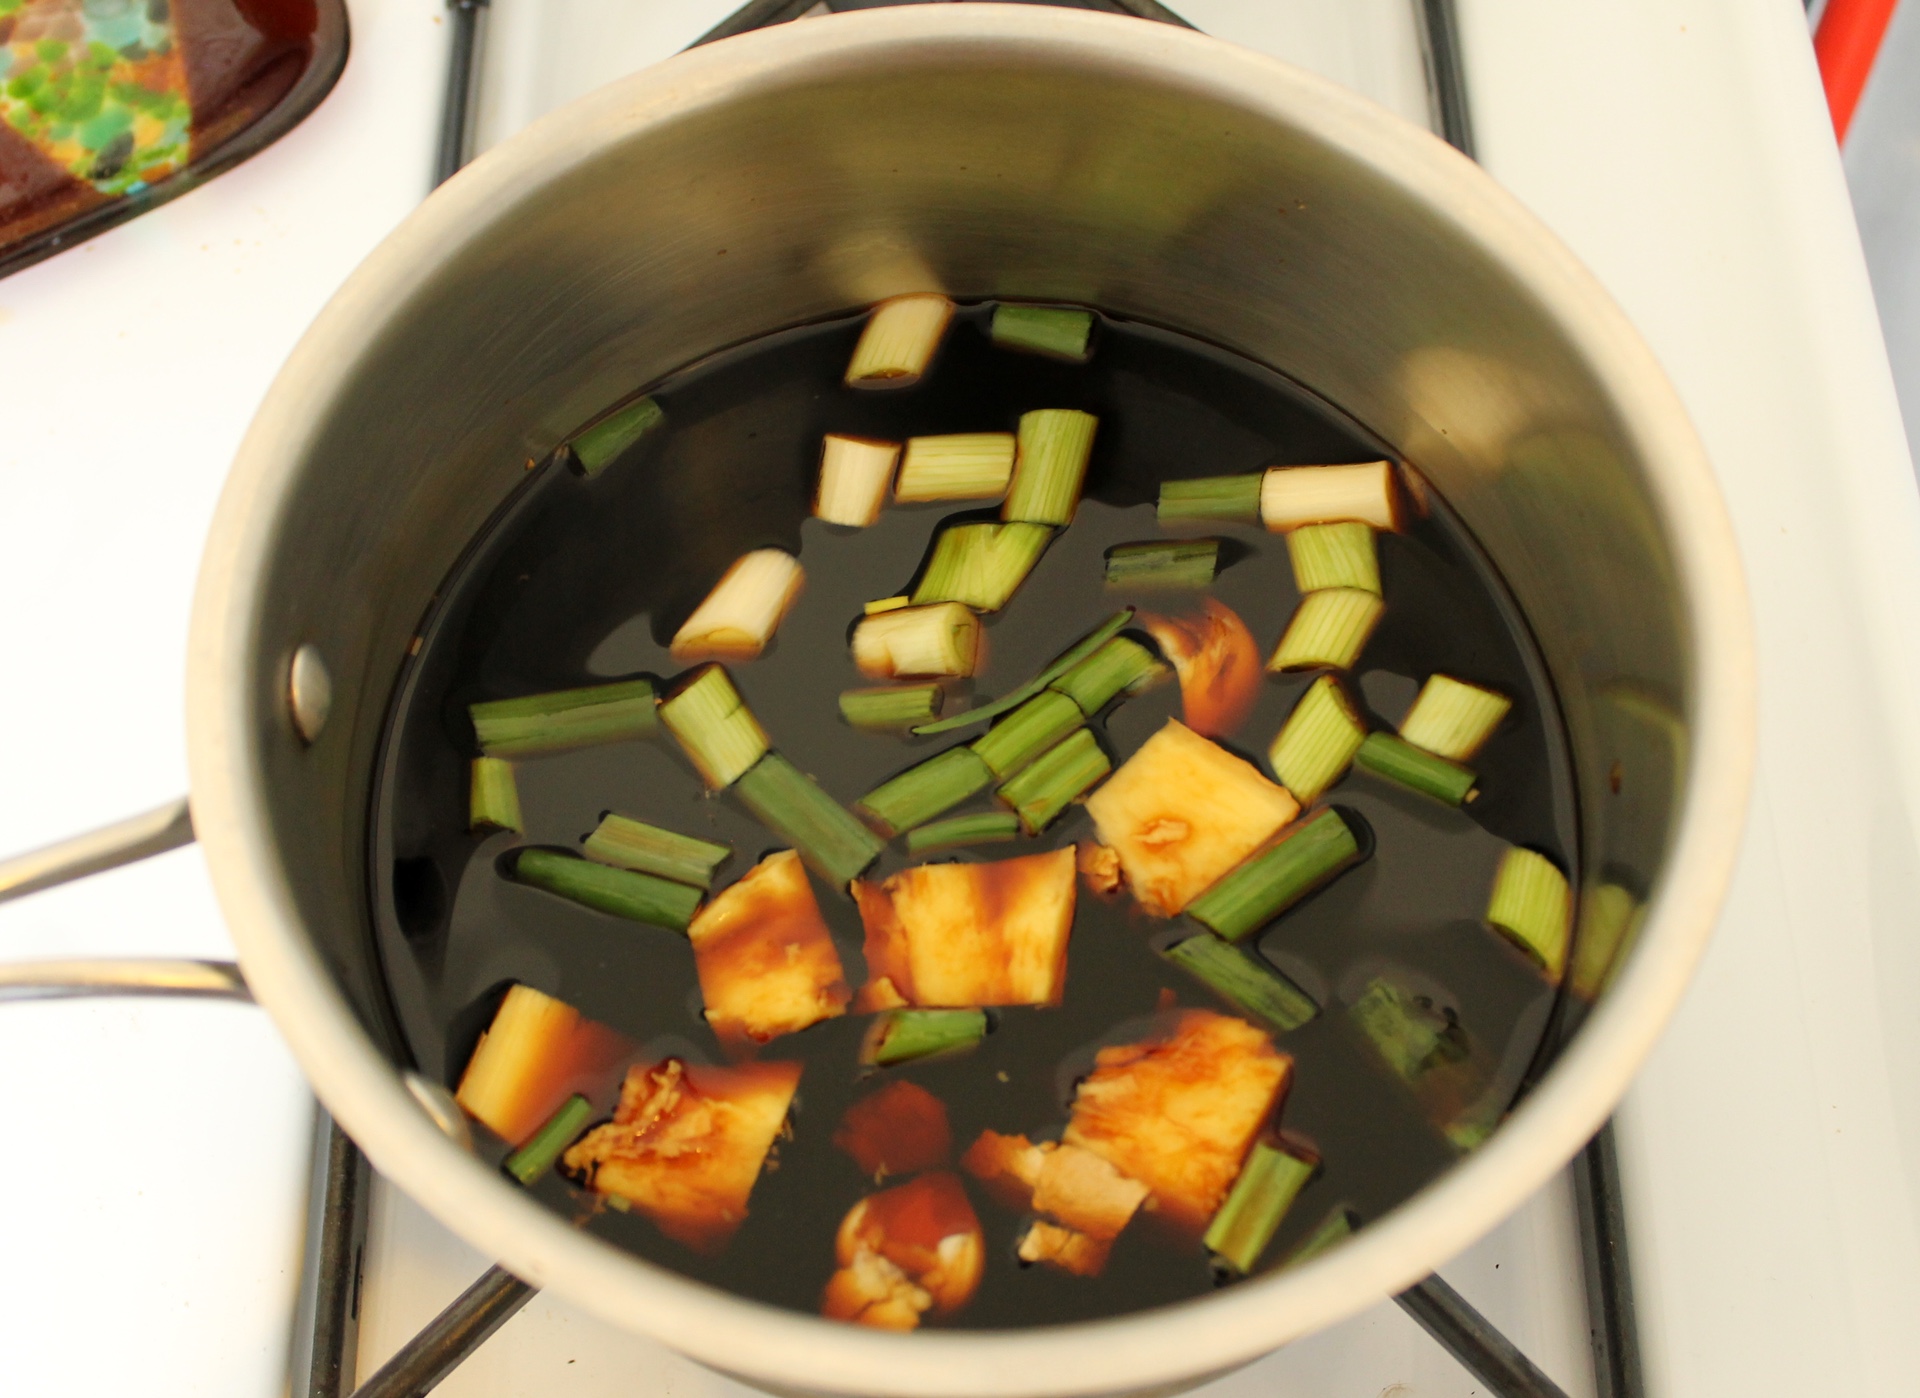 To make shoyu tare, combine soy sauce, sake, scallions, ginger, mirin, and garlic in a medium saucepan. Bring to a boil over high heat. Remove from the heat and let cool to room temperature. Strain and discard solids.